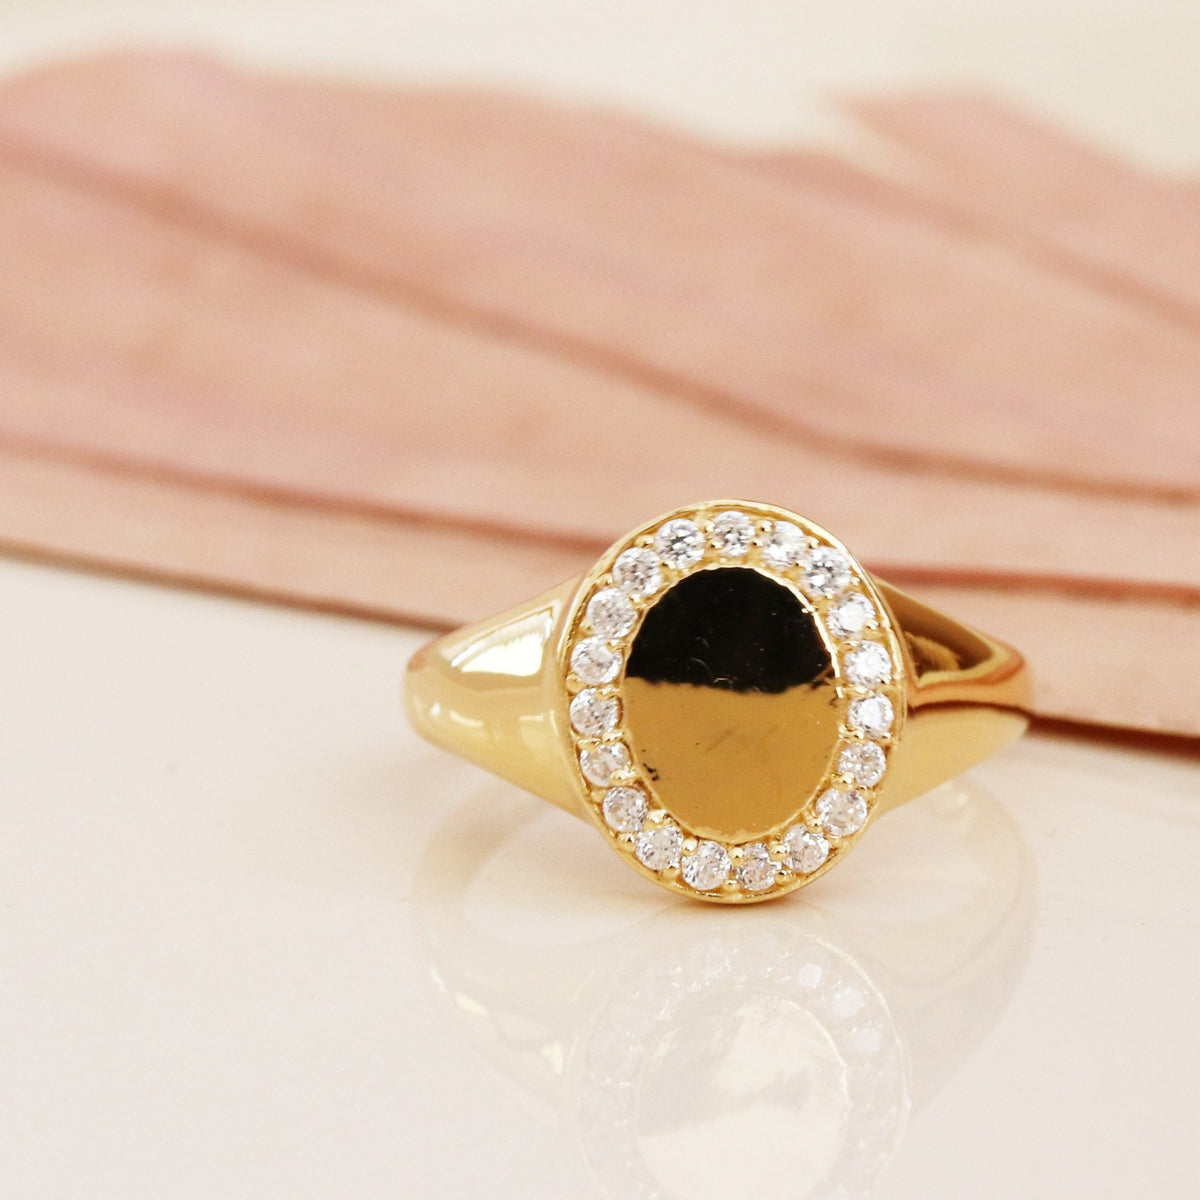 LOVE OVAL SIGNET RING - CUBIC ZIRCONIA &amp; GOLD - SO PRETTY CARA COTTER